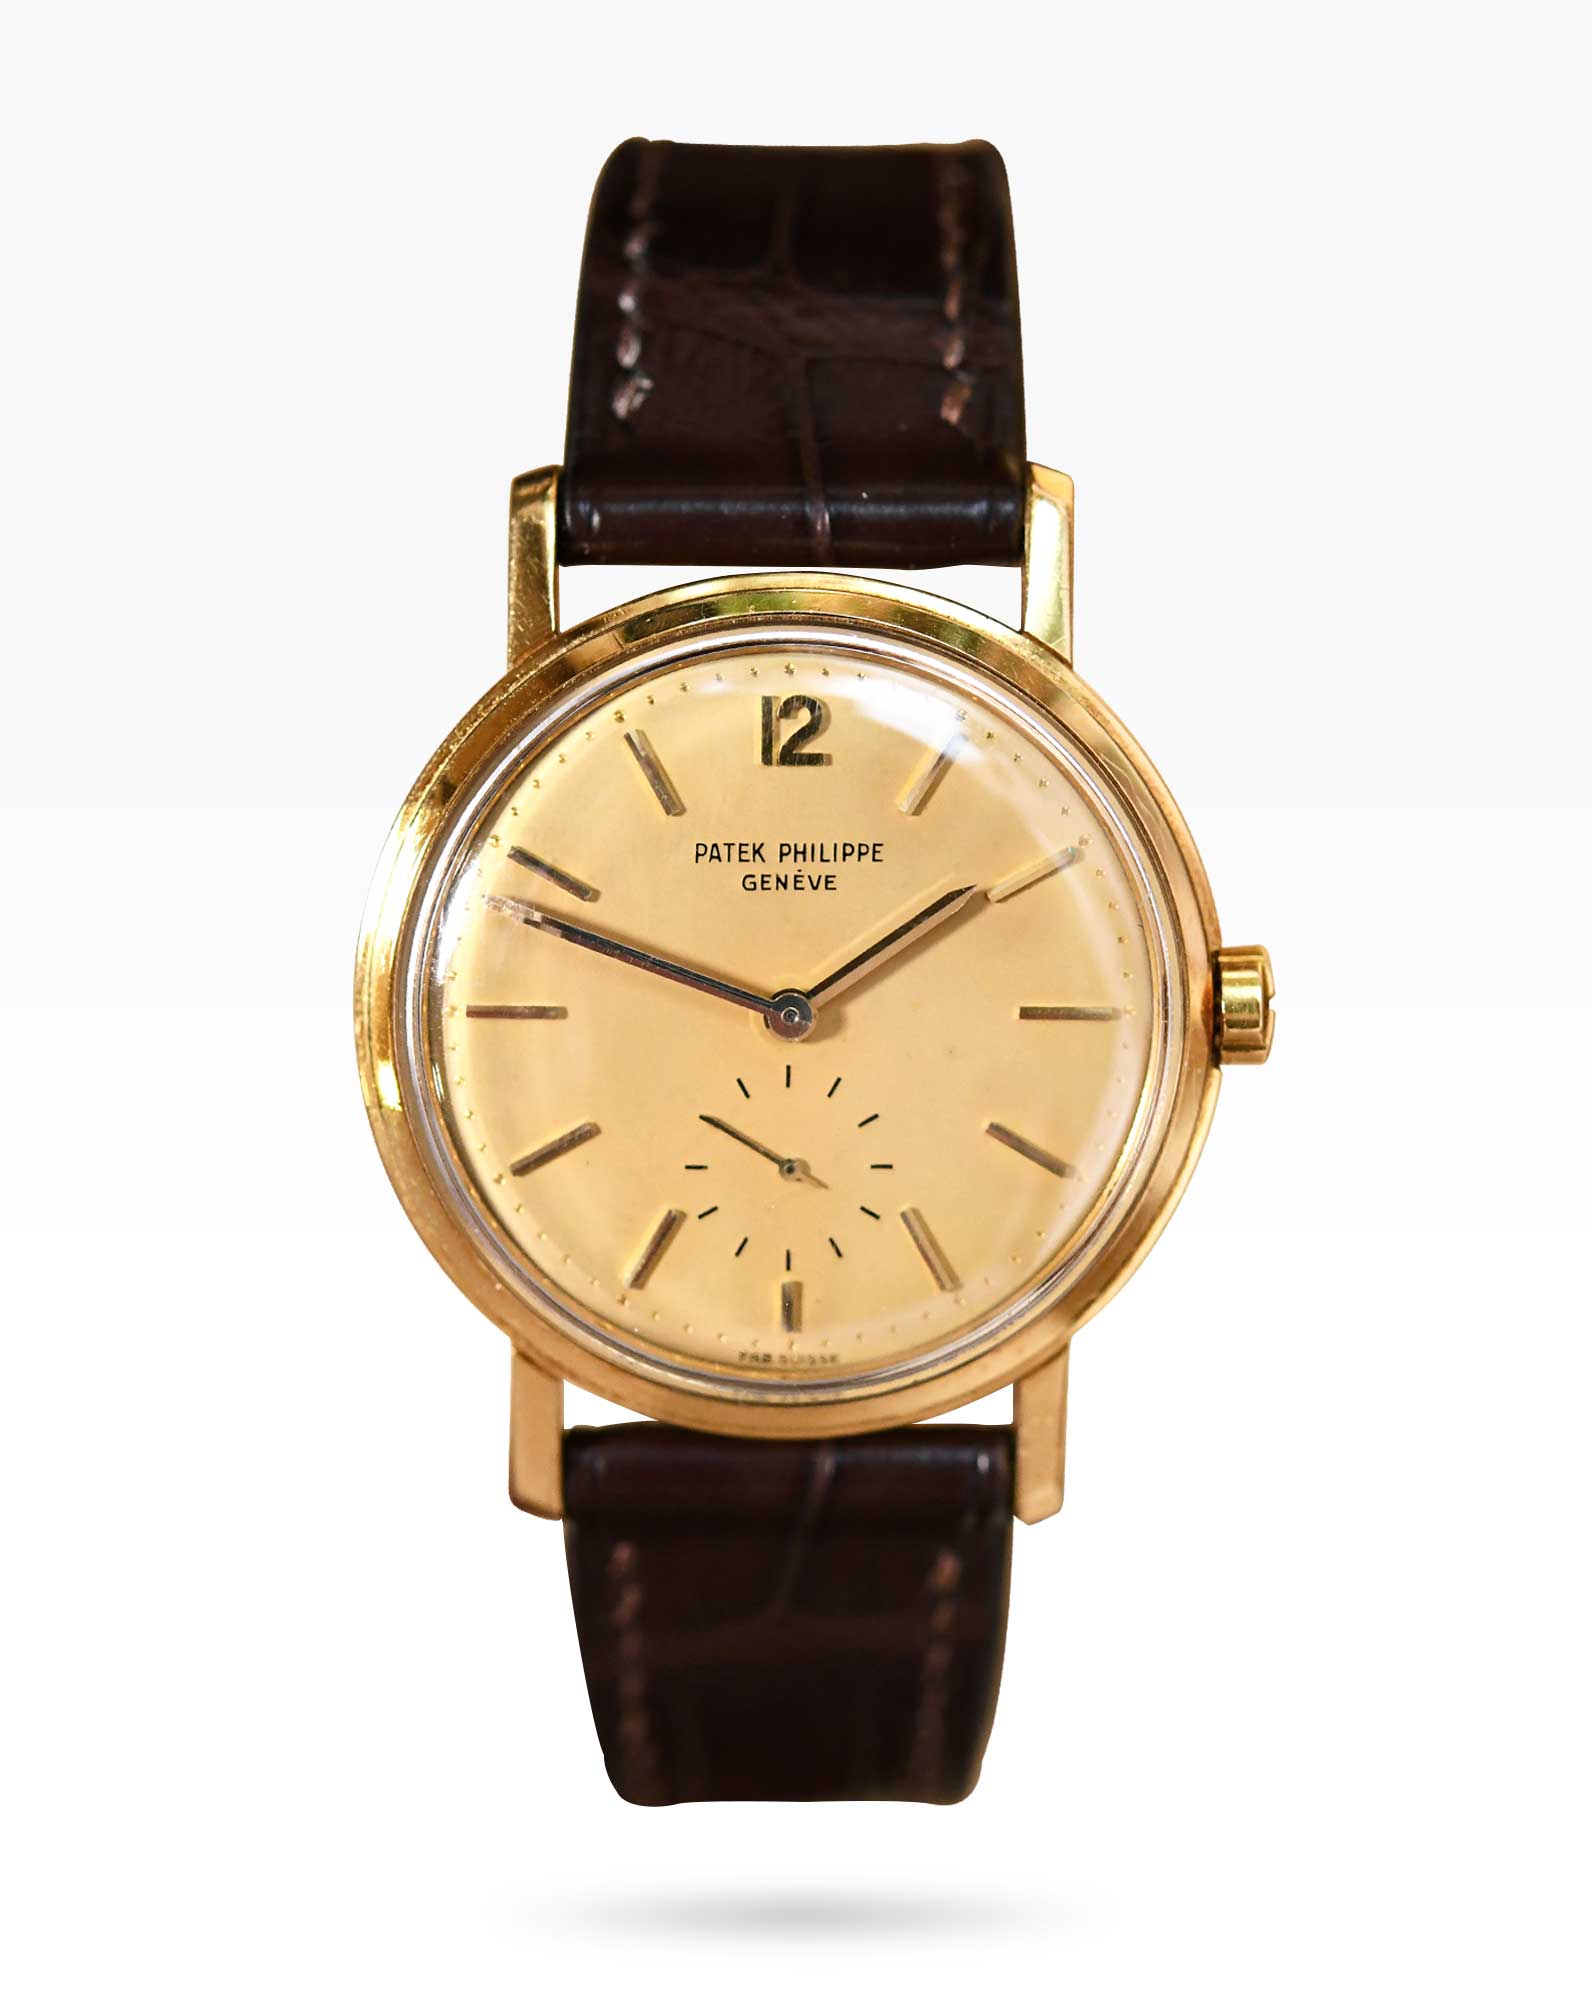 Patek Philippe Calatrava Ref.3435J Yellow Gold Champagne Dial from 1960s - 2ToneVintage Watches